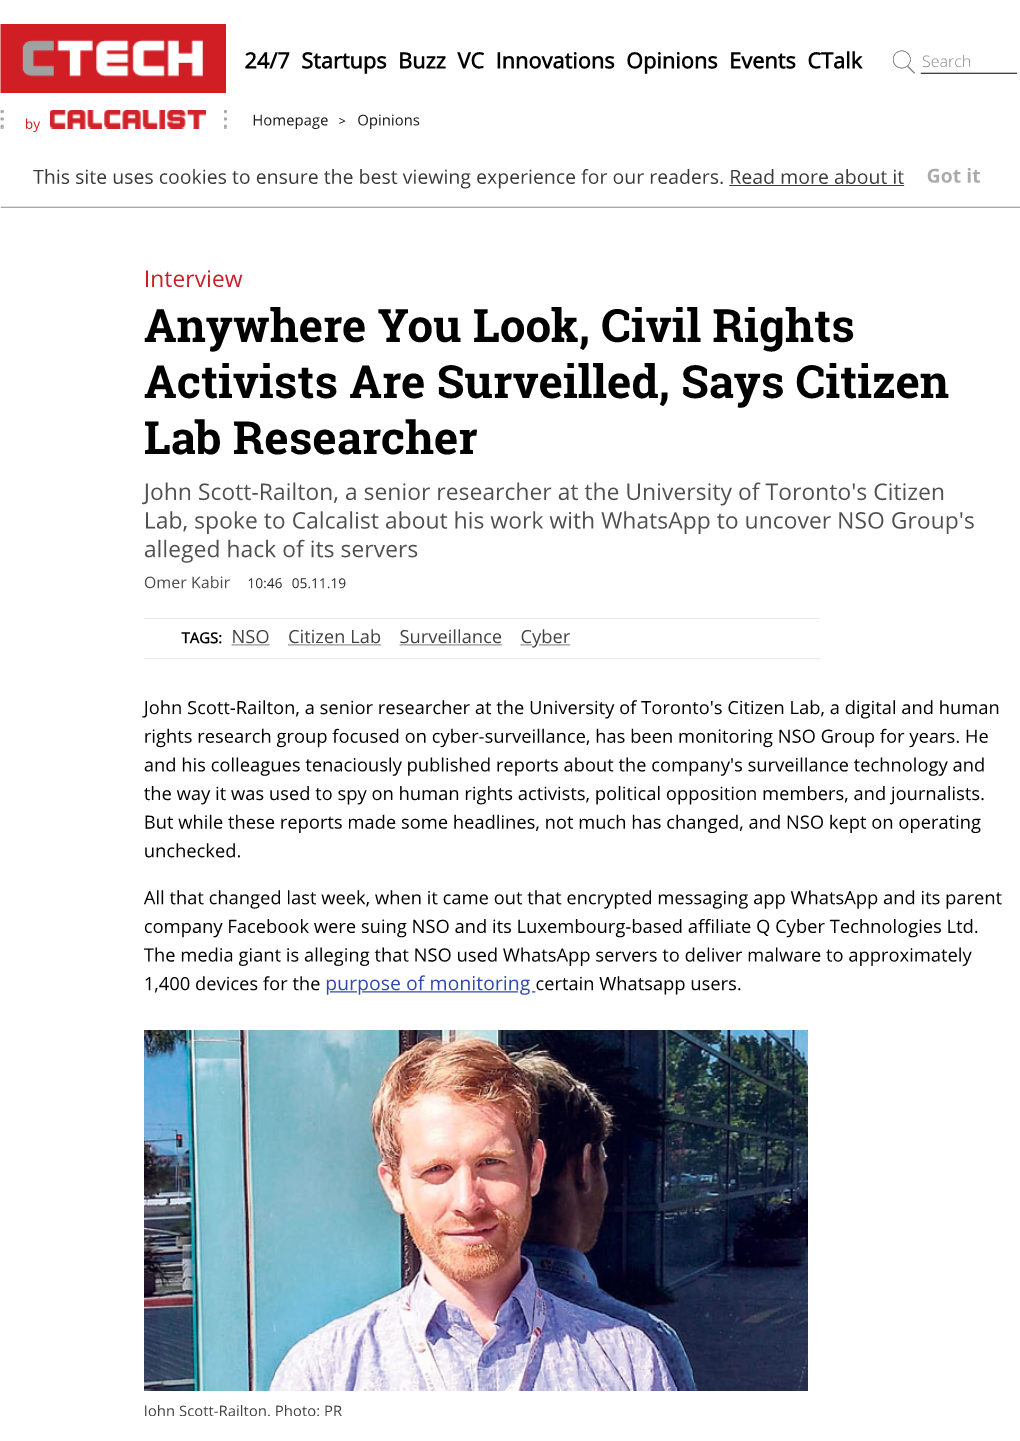 Anywhere You Look, Civil Rights Activists Are Surveilled, Says